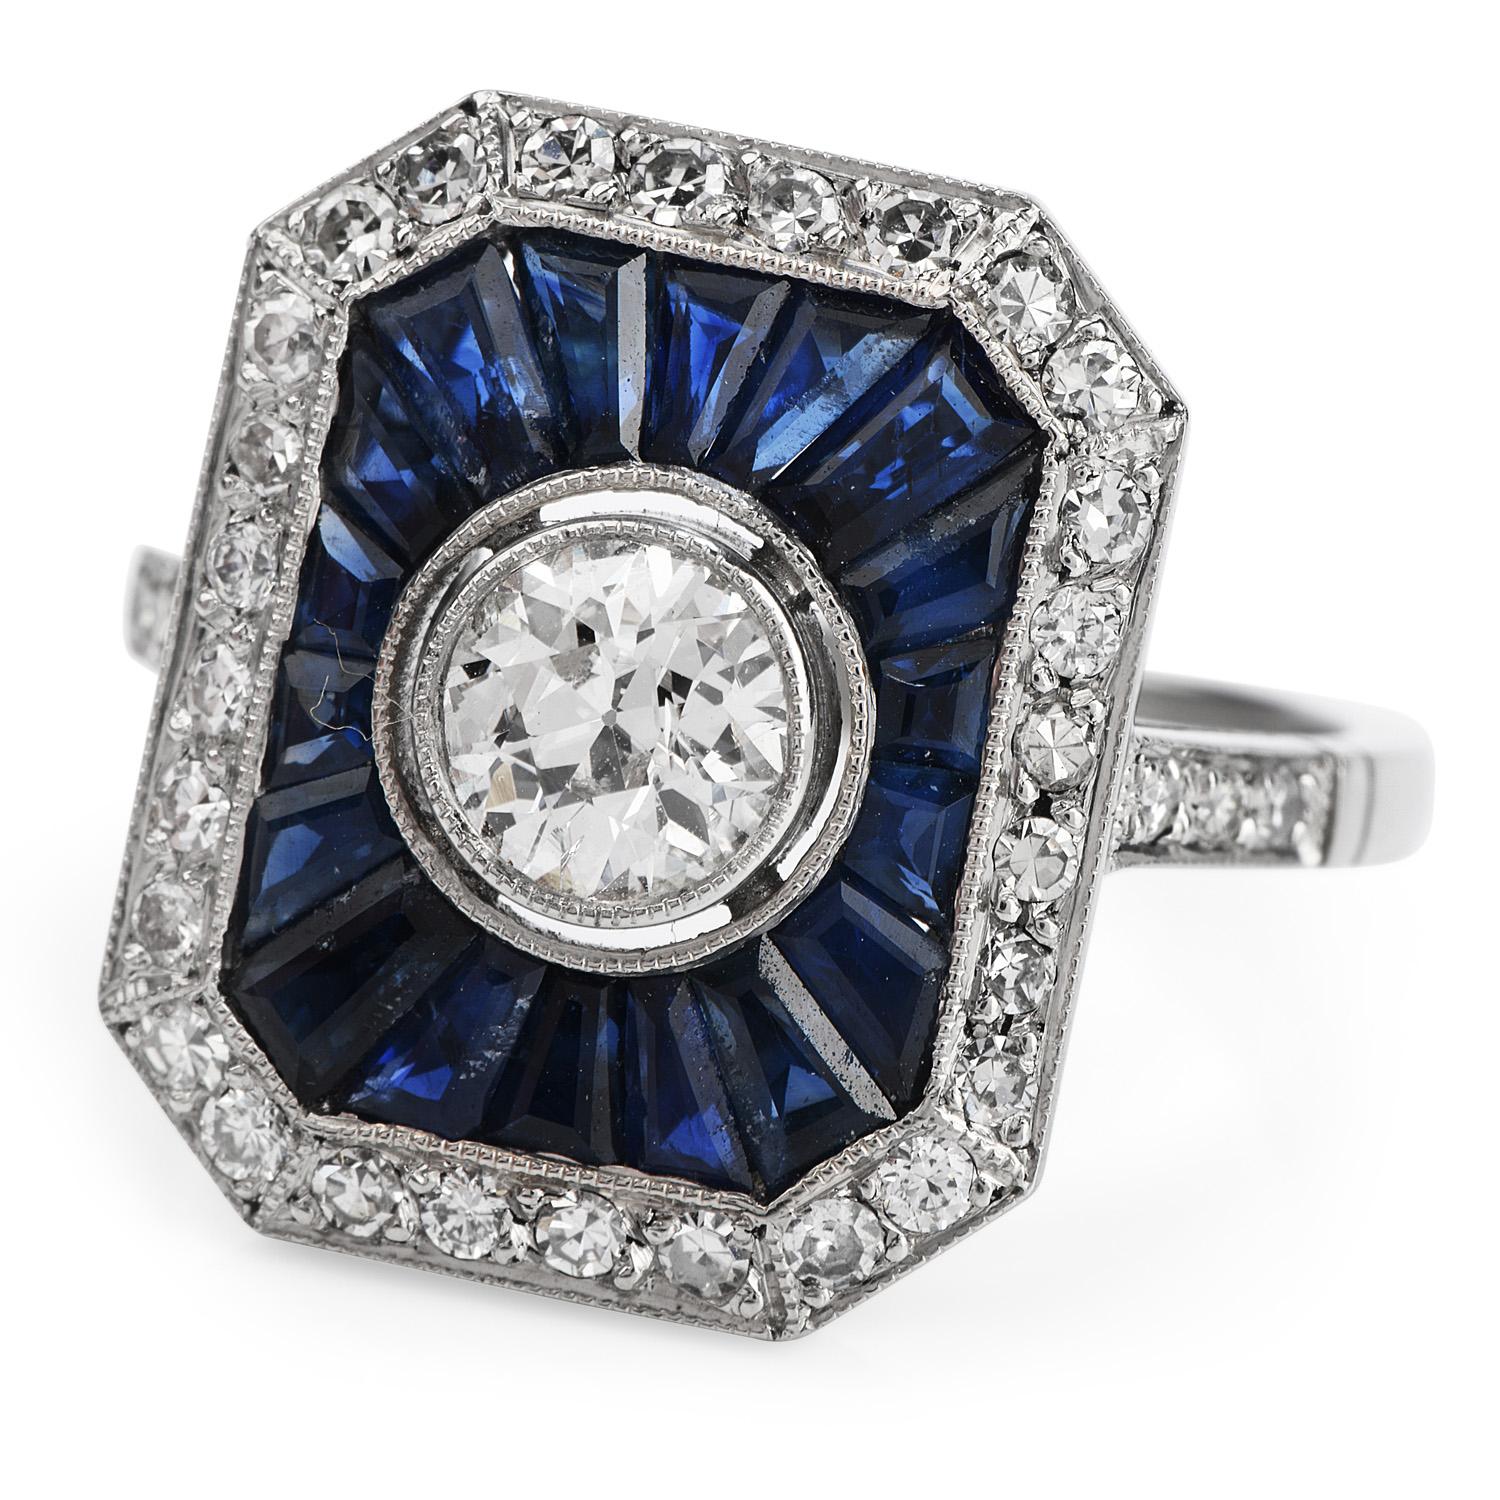 This elegant diamond and sapphire cocktail ring is crafted in solid platinum, weighing 6.7 grams and measuring 17mm x 6mm high. Simulating a rectangle frame, it centered with one genuine European cut diamond weighing approx.0.60 carats H-I color, VS